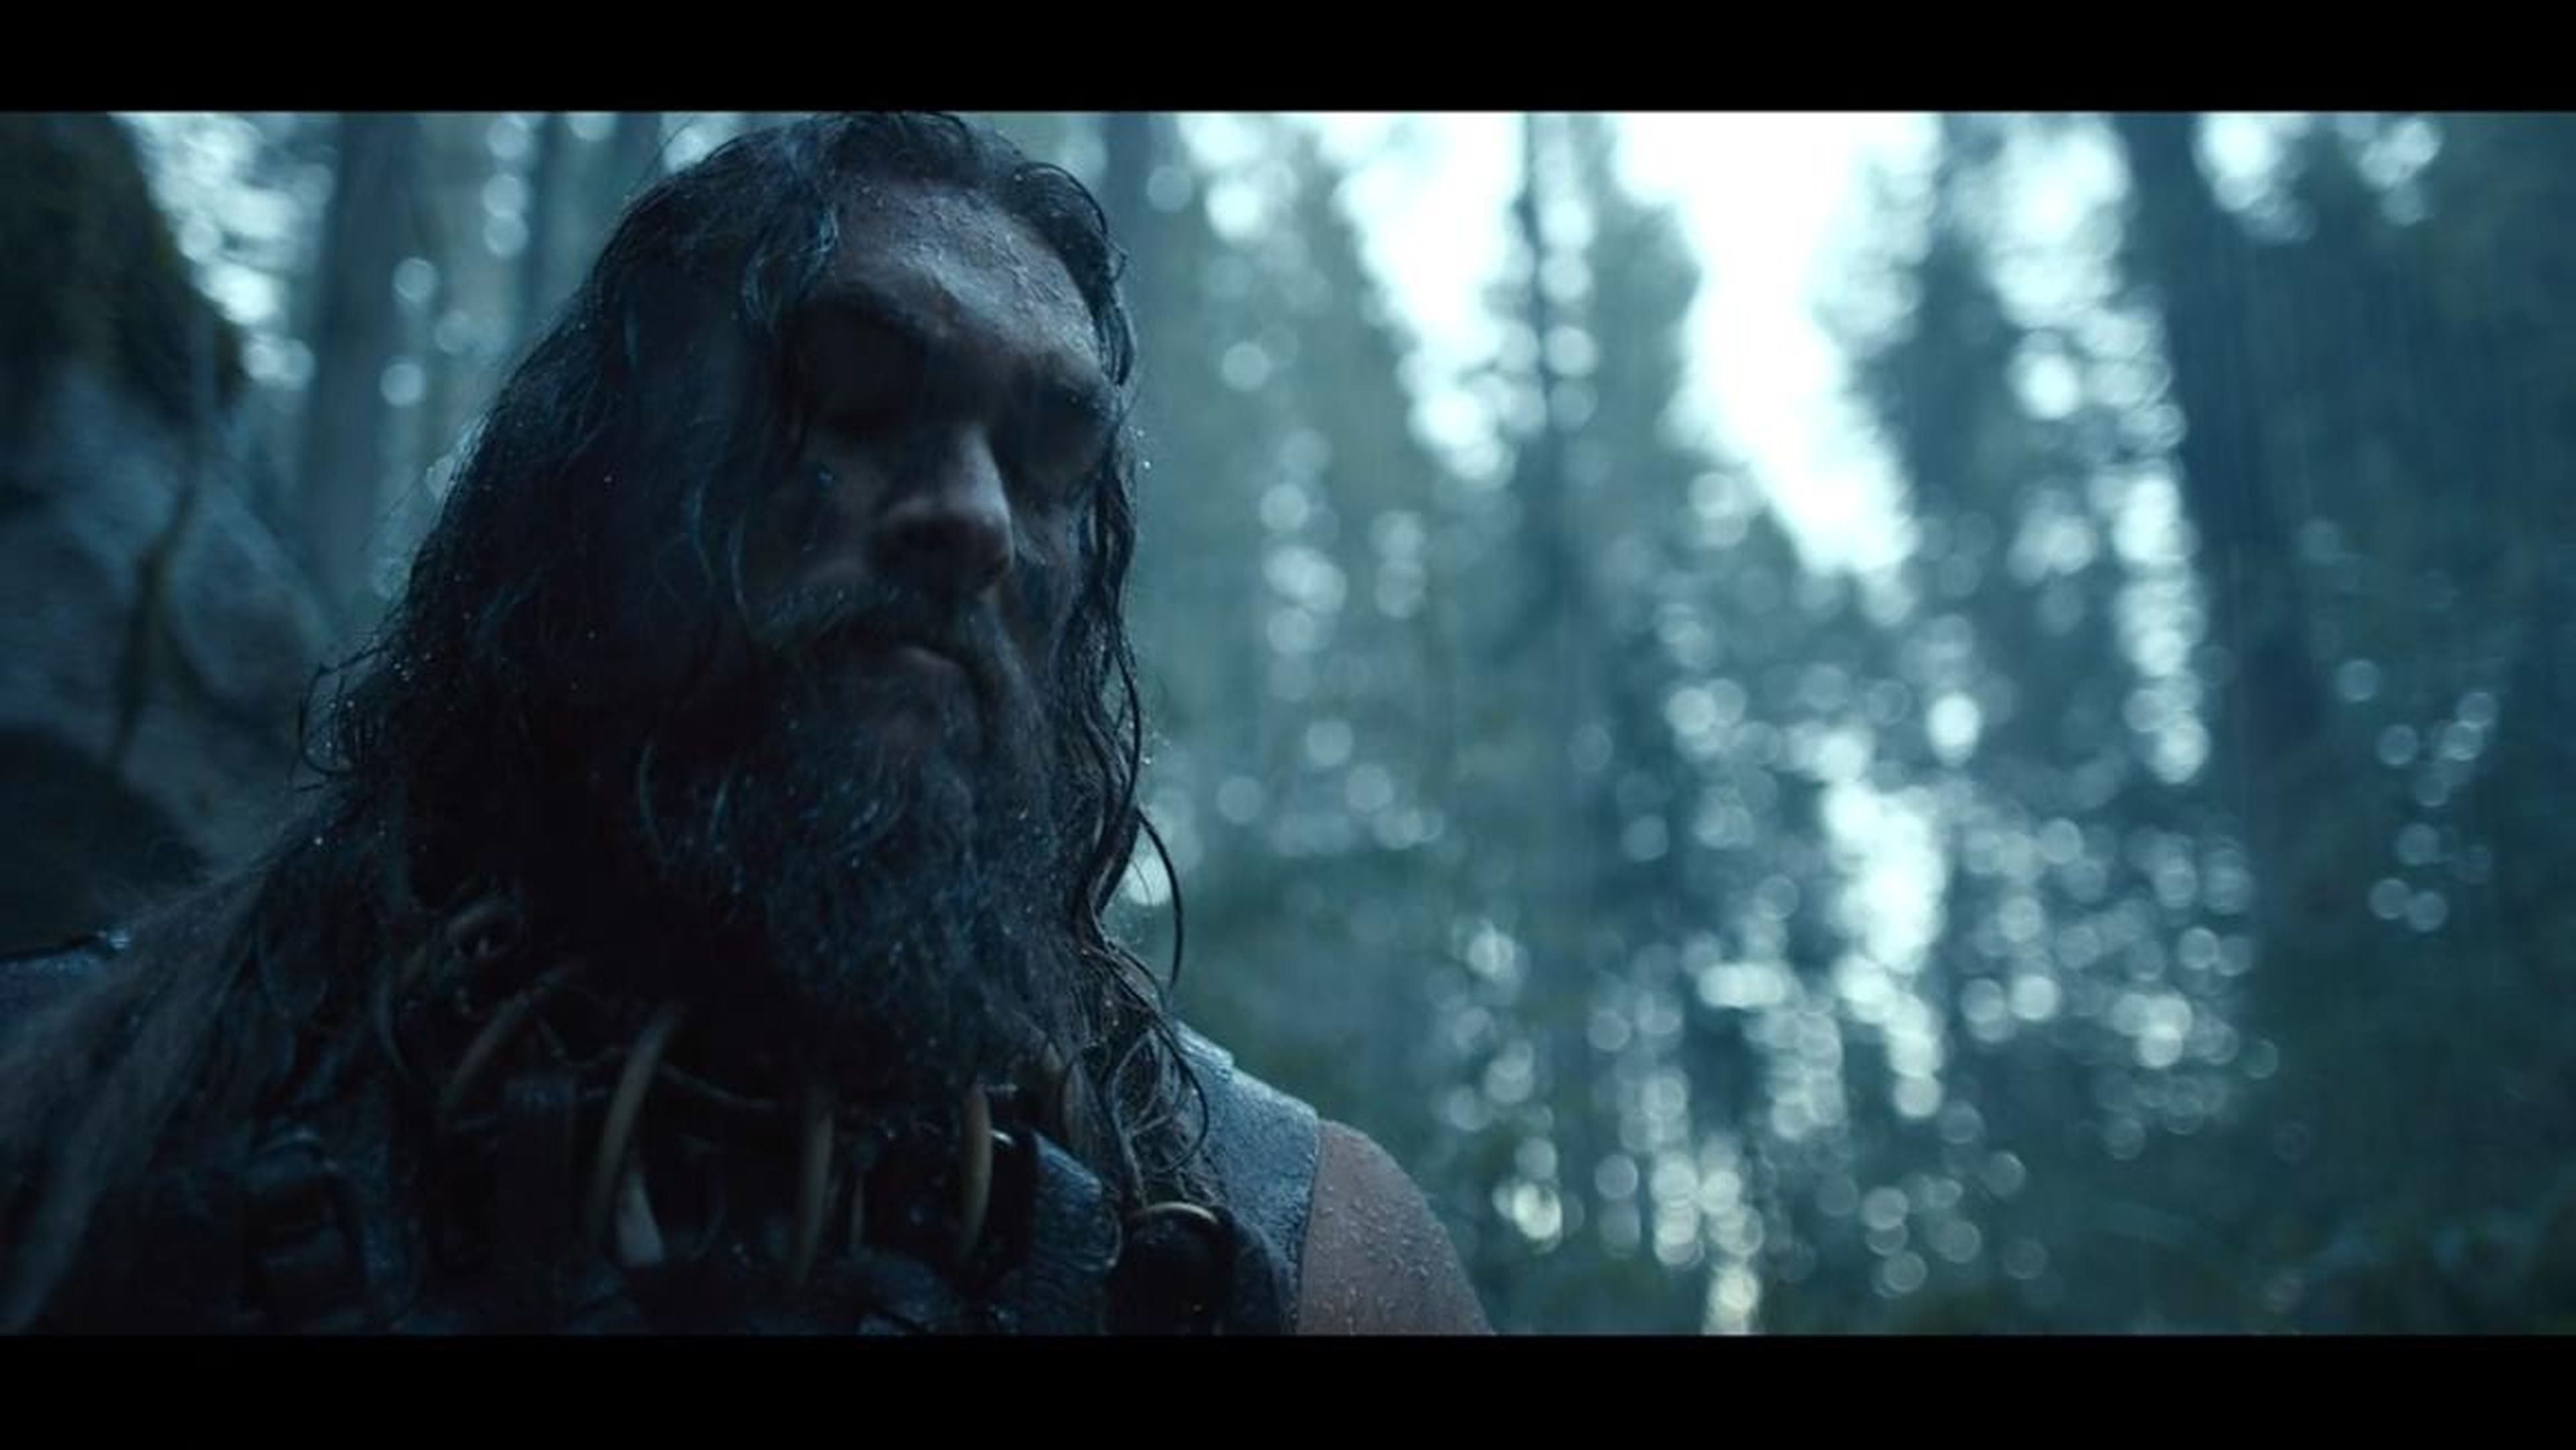 Apple played a brief trailer at the end of the event, showing moments from some of the aforementioned shows like "See" with Jason Momoa, and others that no one had seen yet.